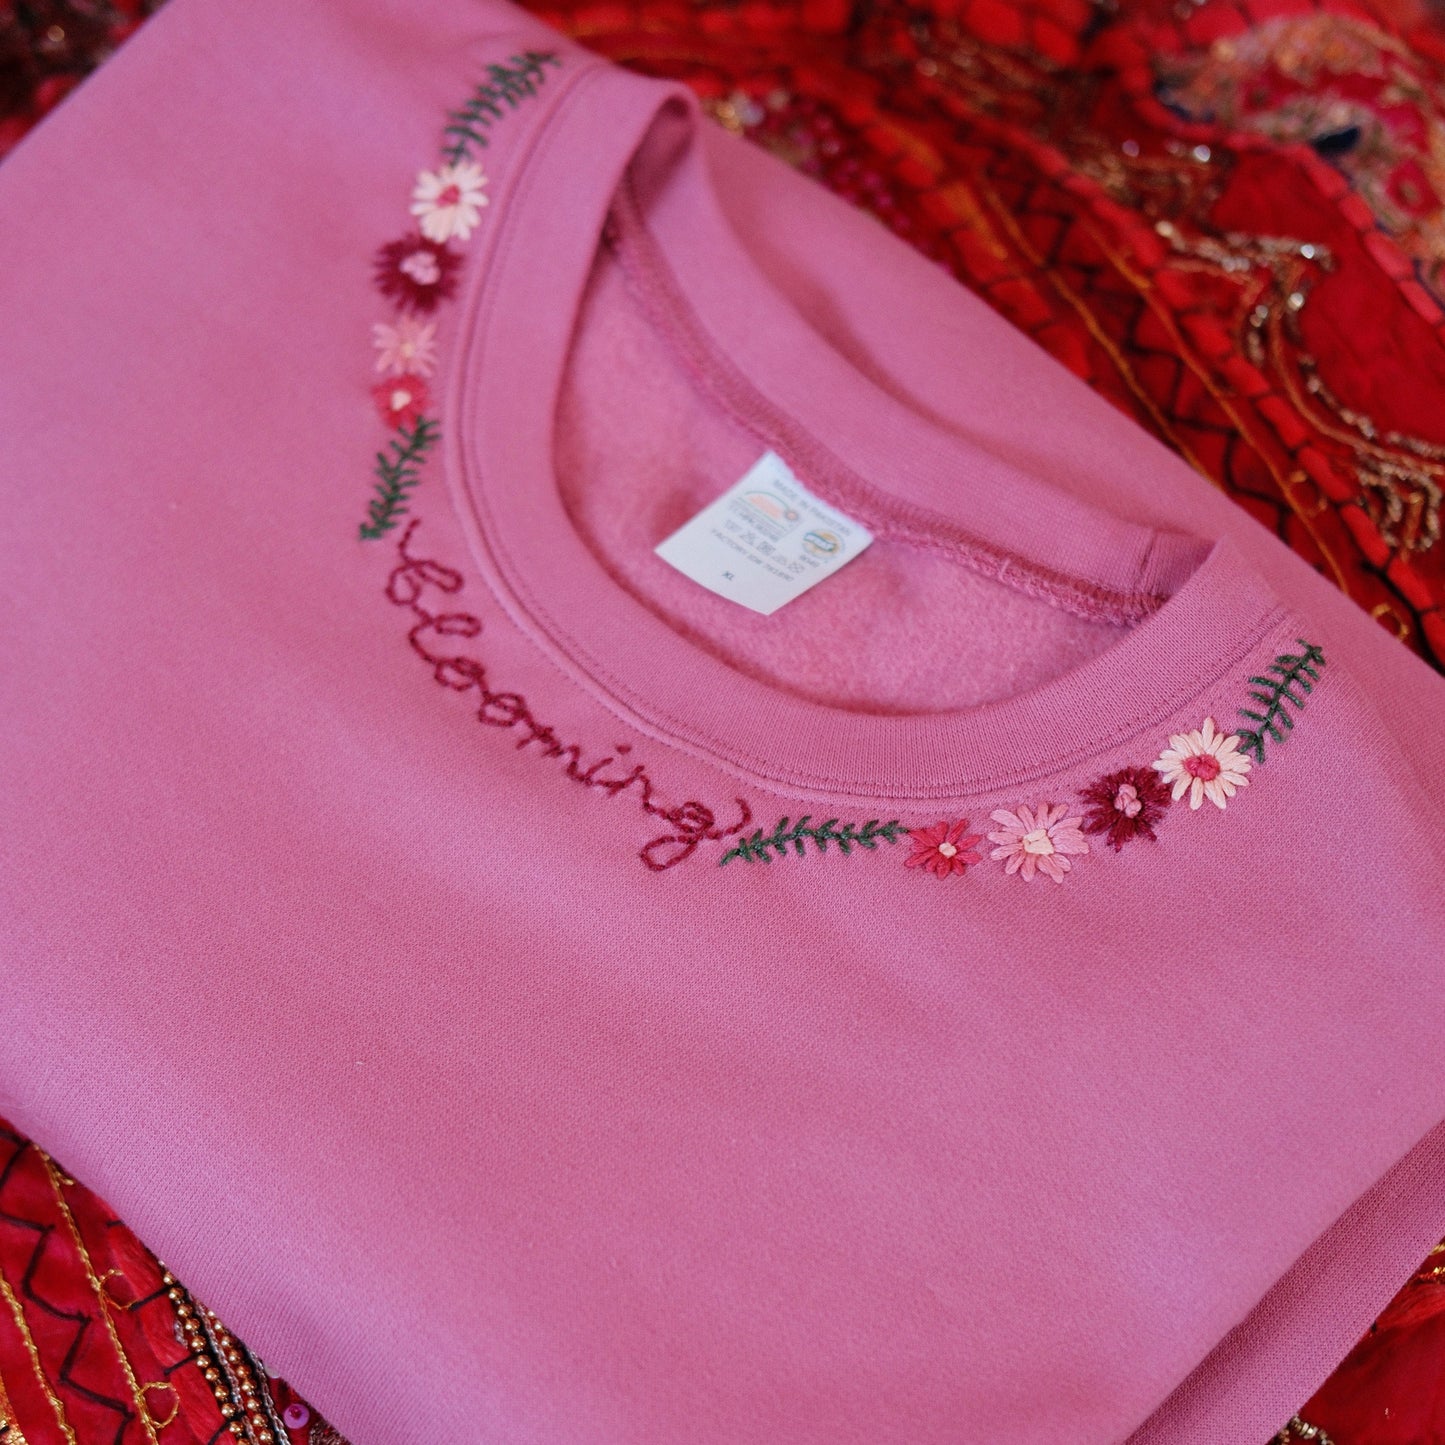 blooming hand-embroidered sweatshirt - pink v.2